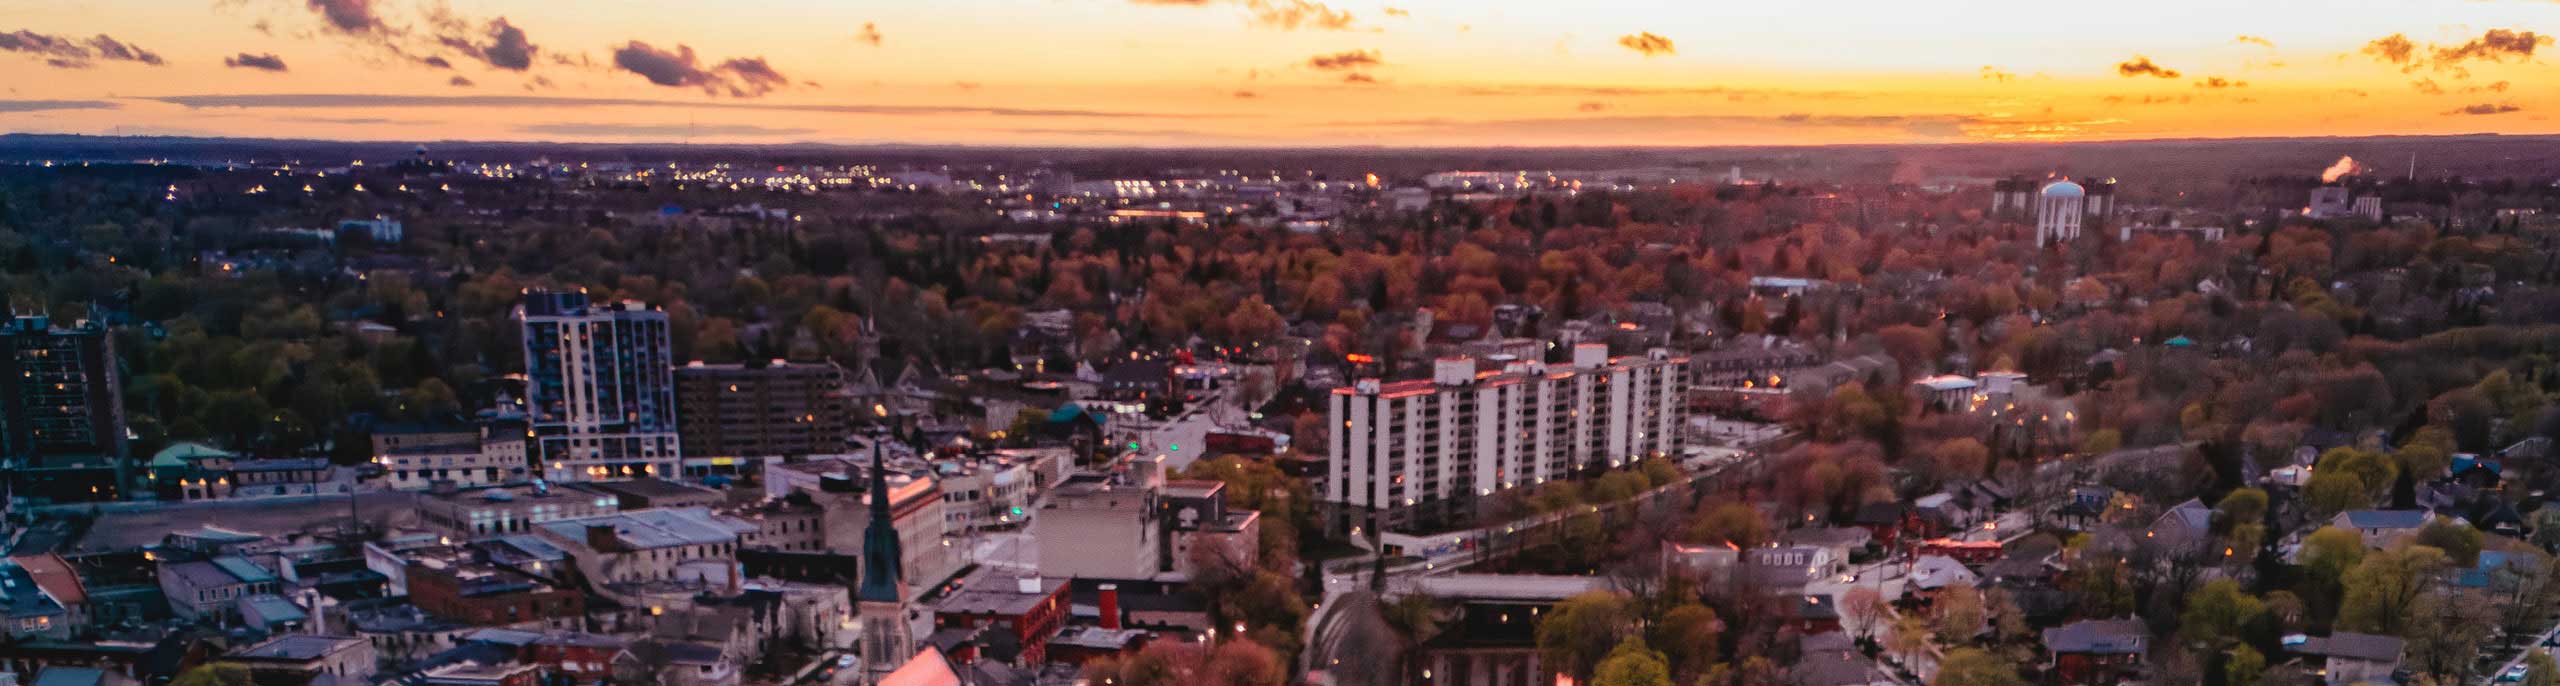 aerial view of Guelph at sunset.